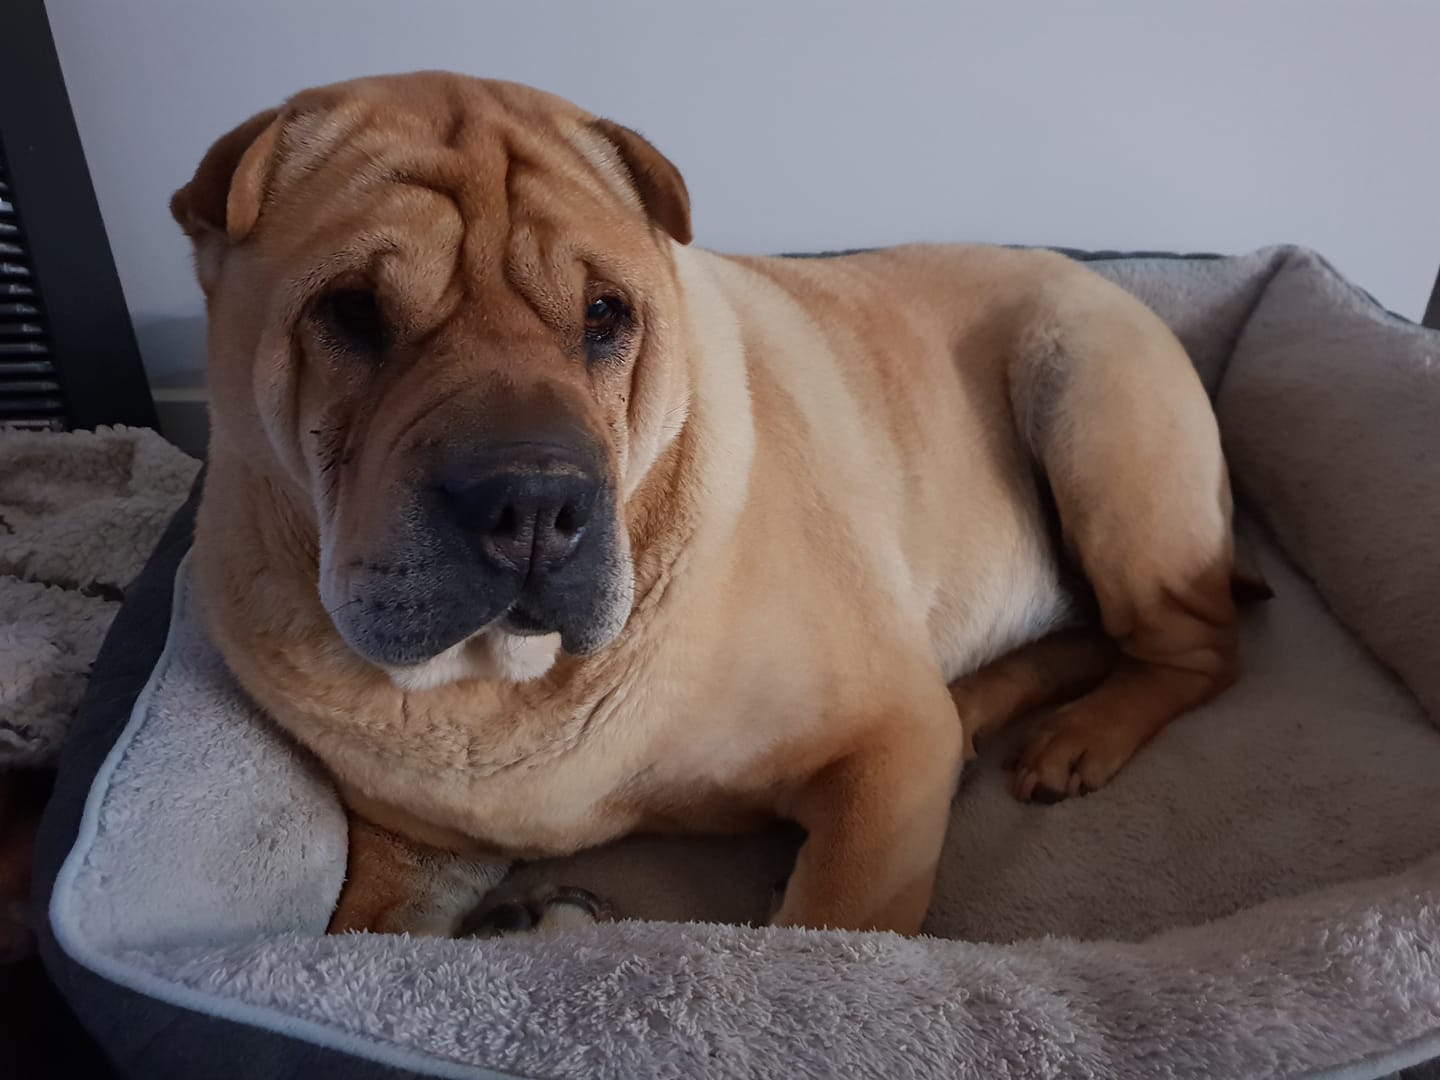 A Shar-Pei lying on its bed